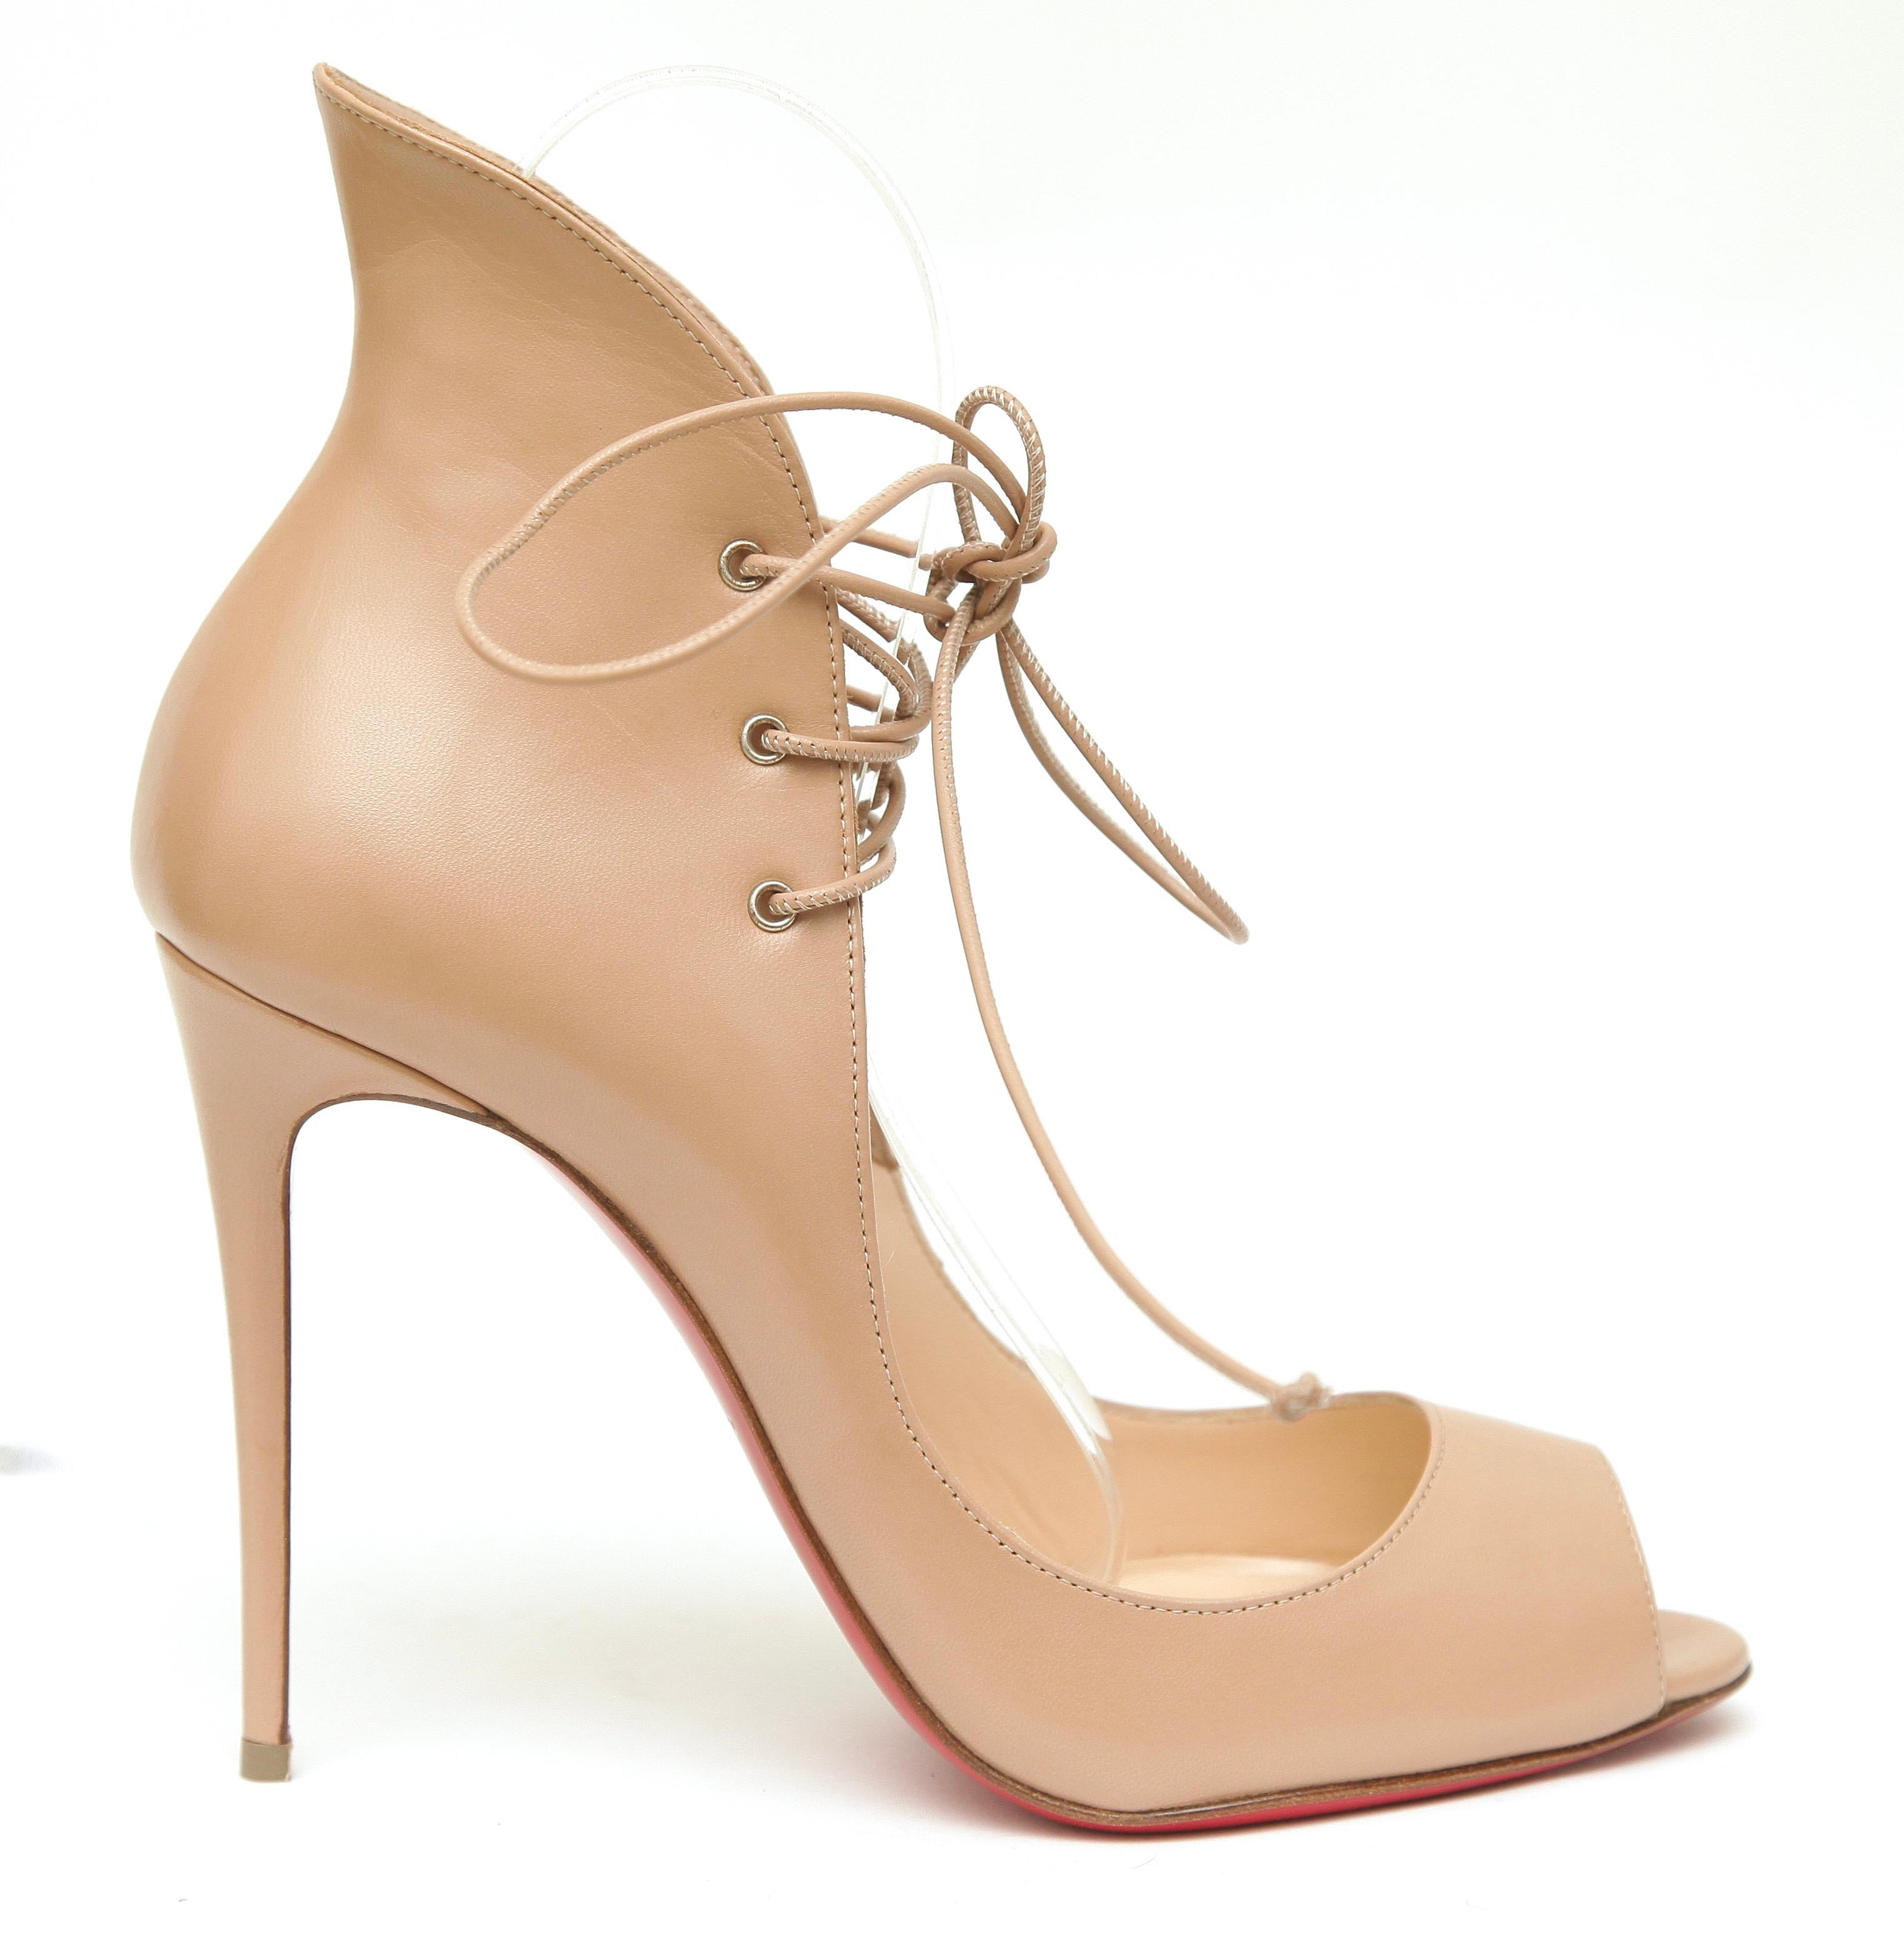 CHRISTIAN LOUBOUTIN MEGAVAMP BEIGE LEATHER PUMPS

Design:
- Beige leather uppers.
- Beige laces.
- Peep toe.
- Self-covered heel.
- Leather lining.
- Signature red leather sole.
- Comes with Christian Louboutin dust bag.

Size: 38

Measurements